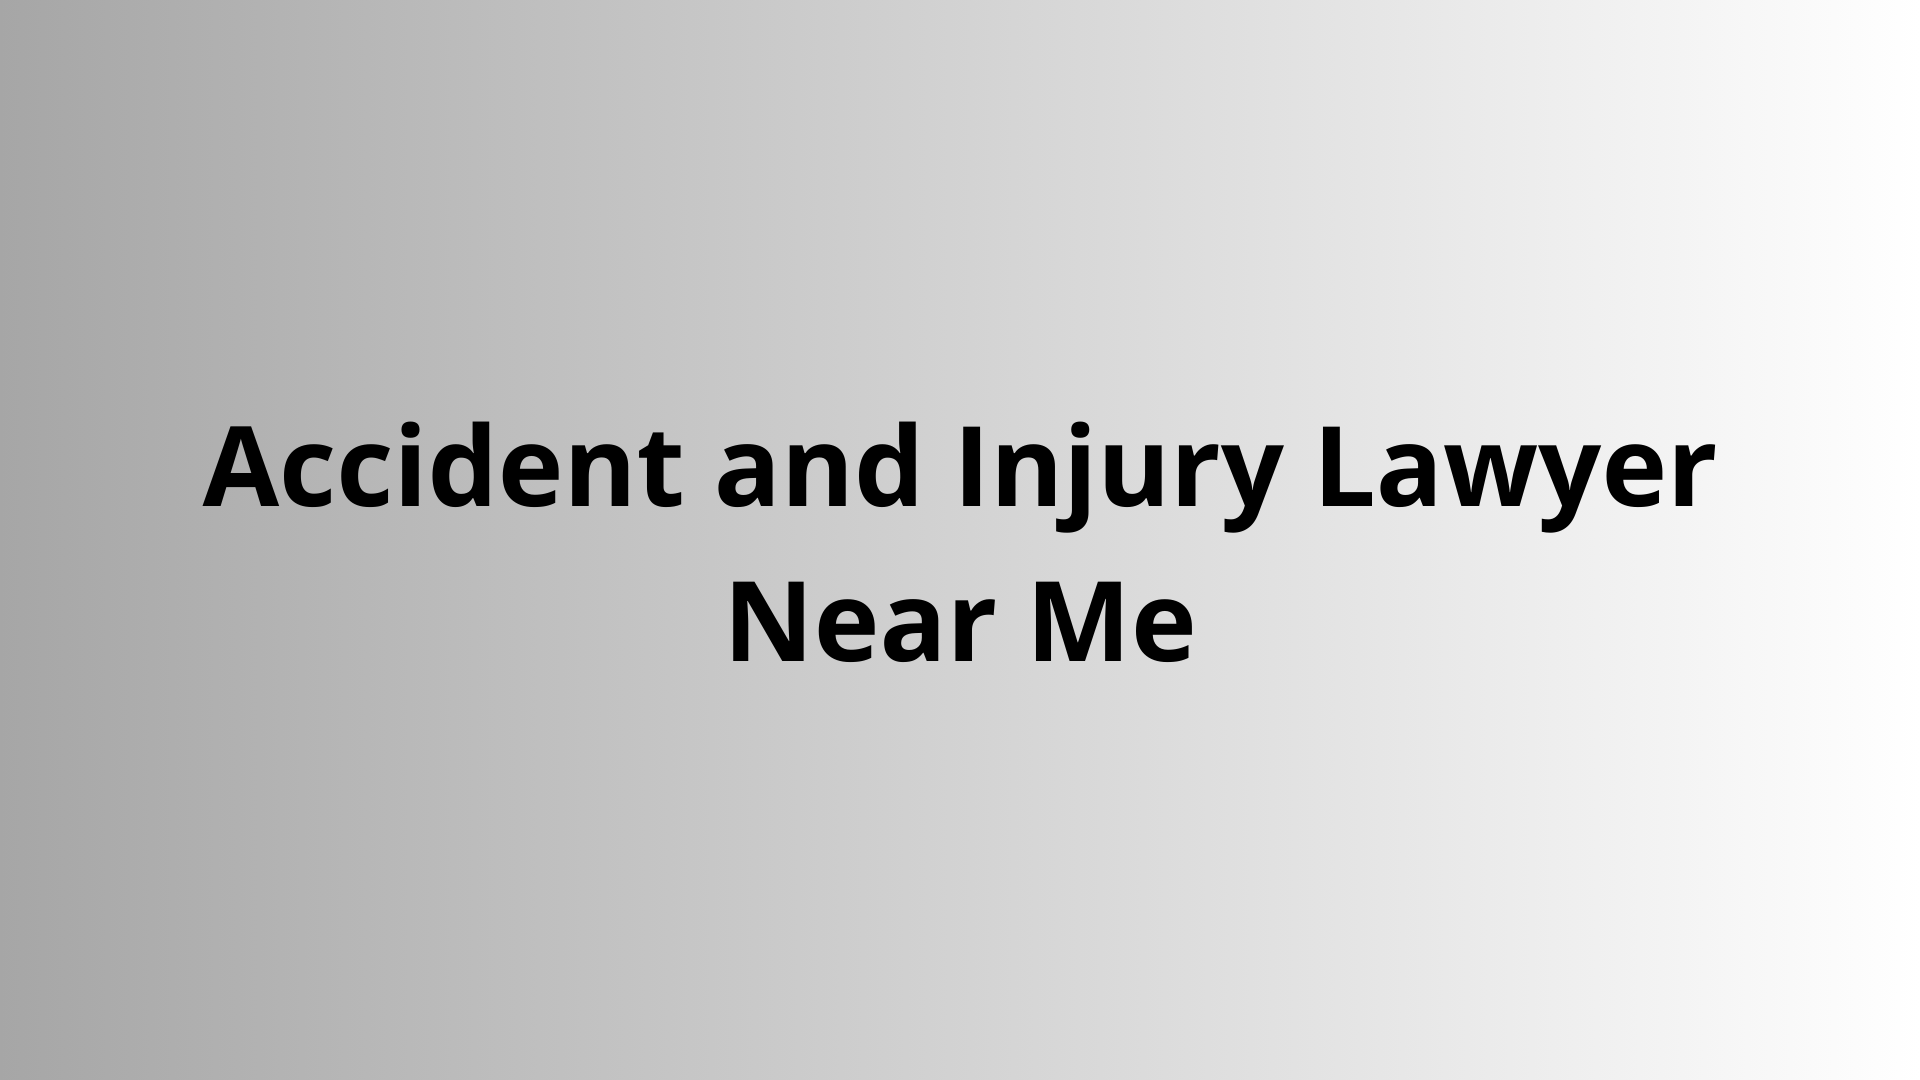 Accident and Injury Lawyer Near Me